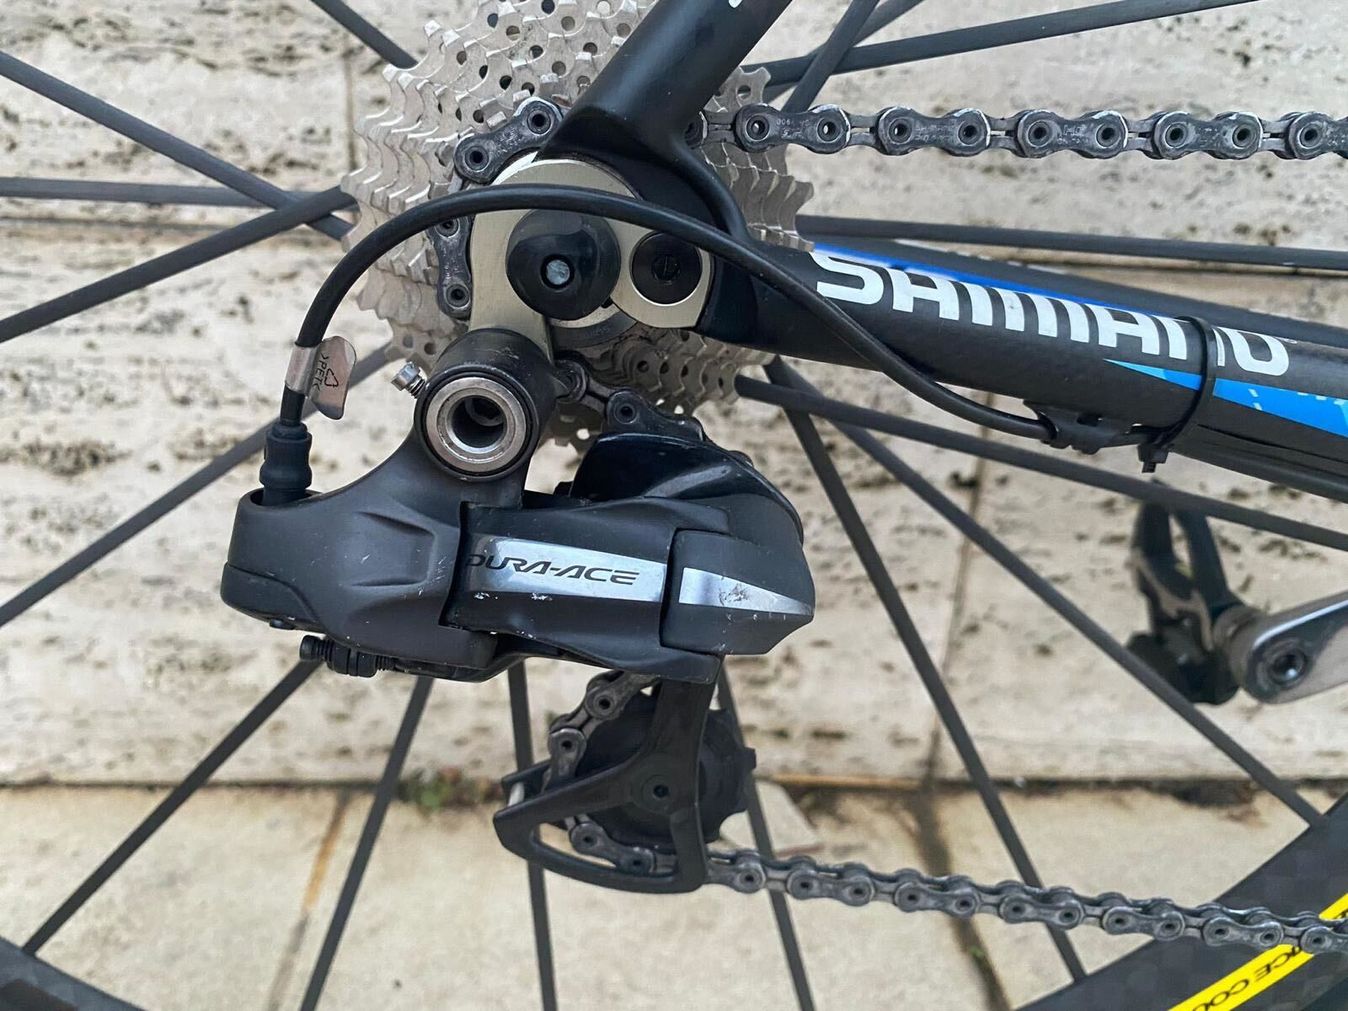 Shimano's Di2 platform came in to existence as early as 2009 but we have never seen a Dura-Ace electronic brake